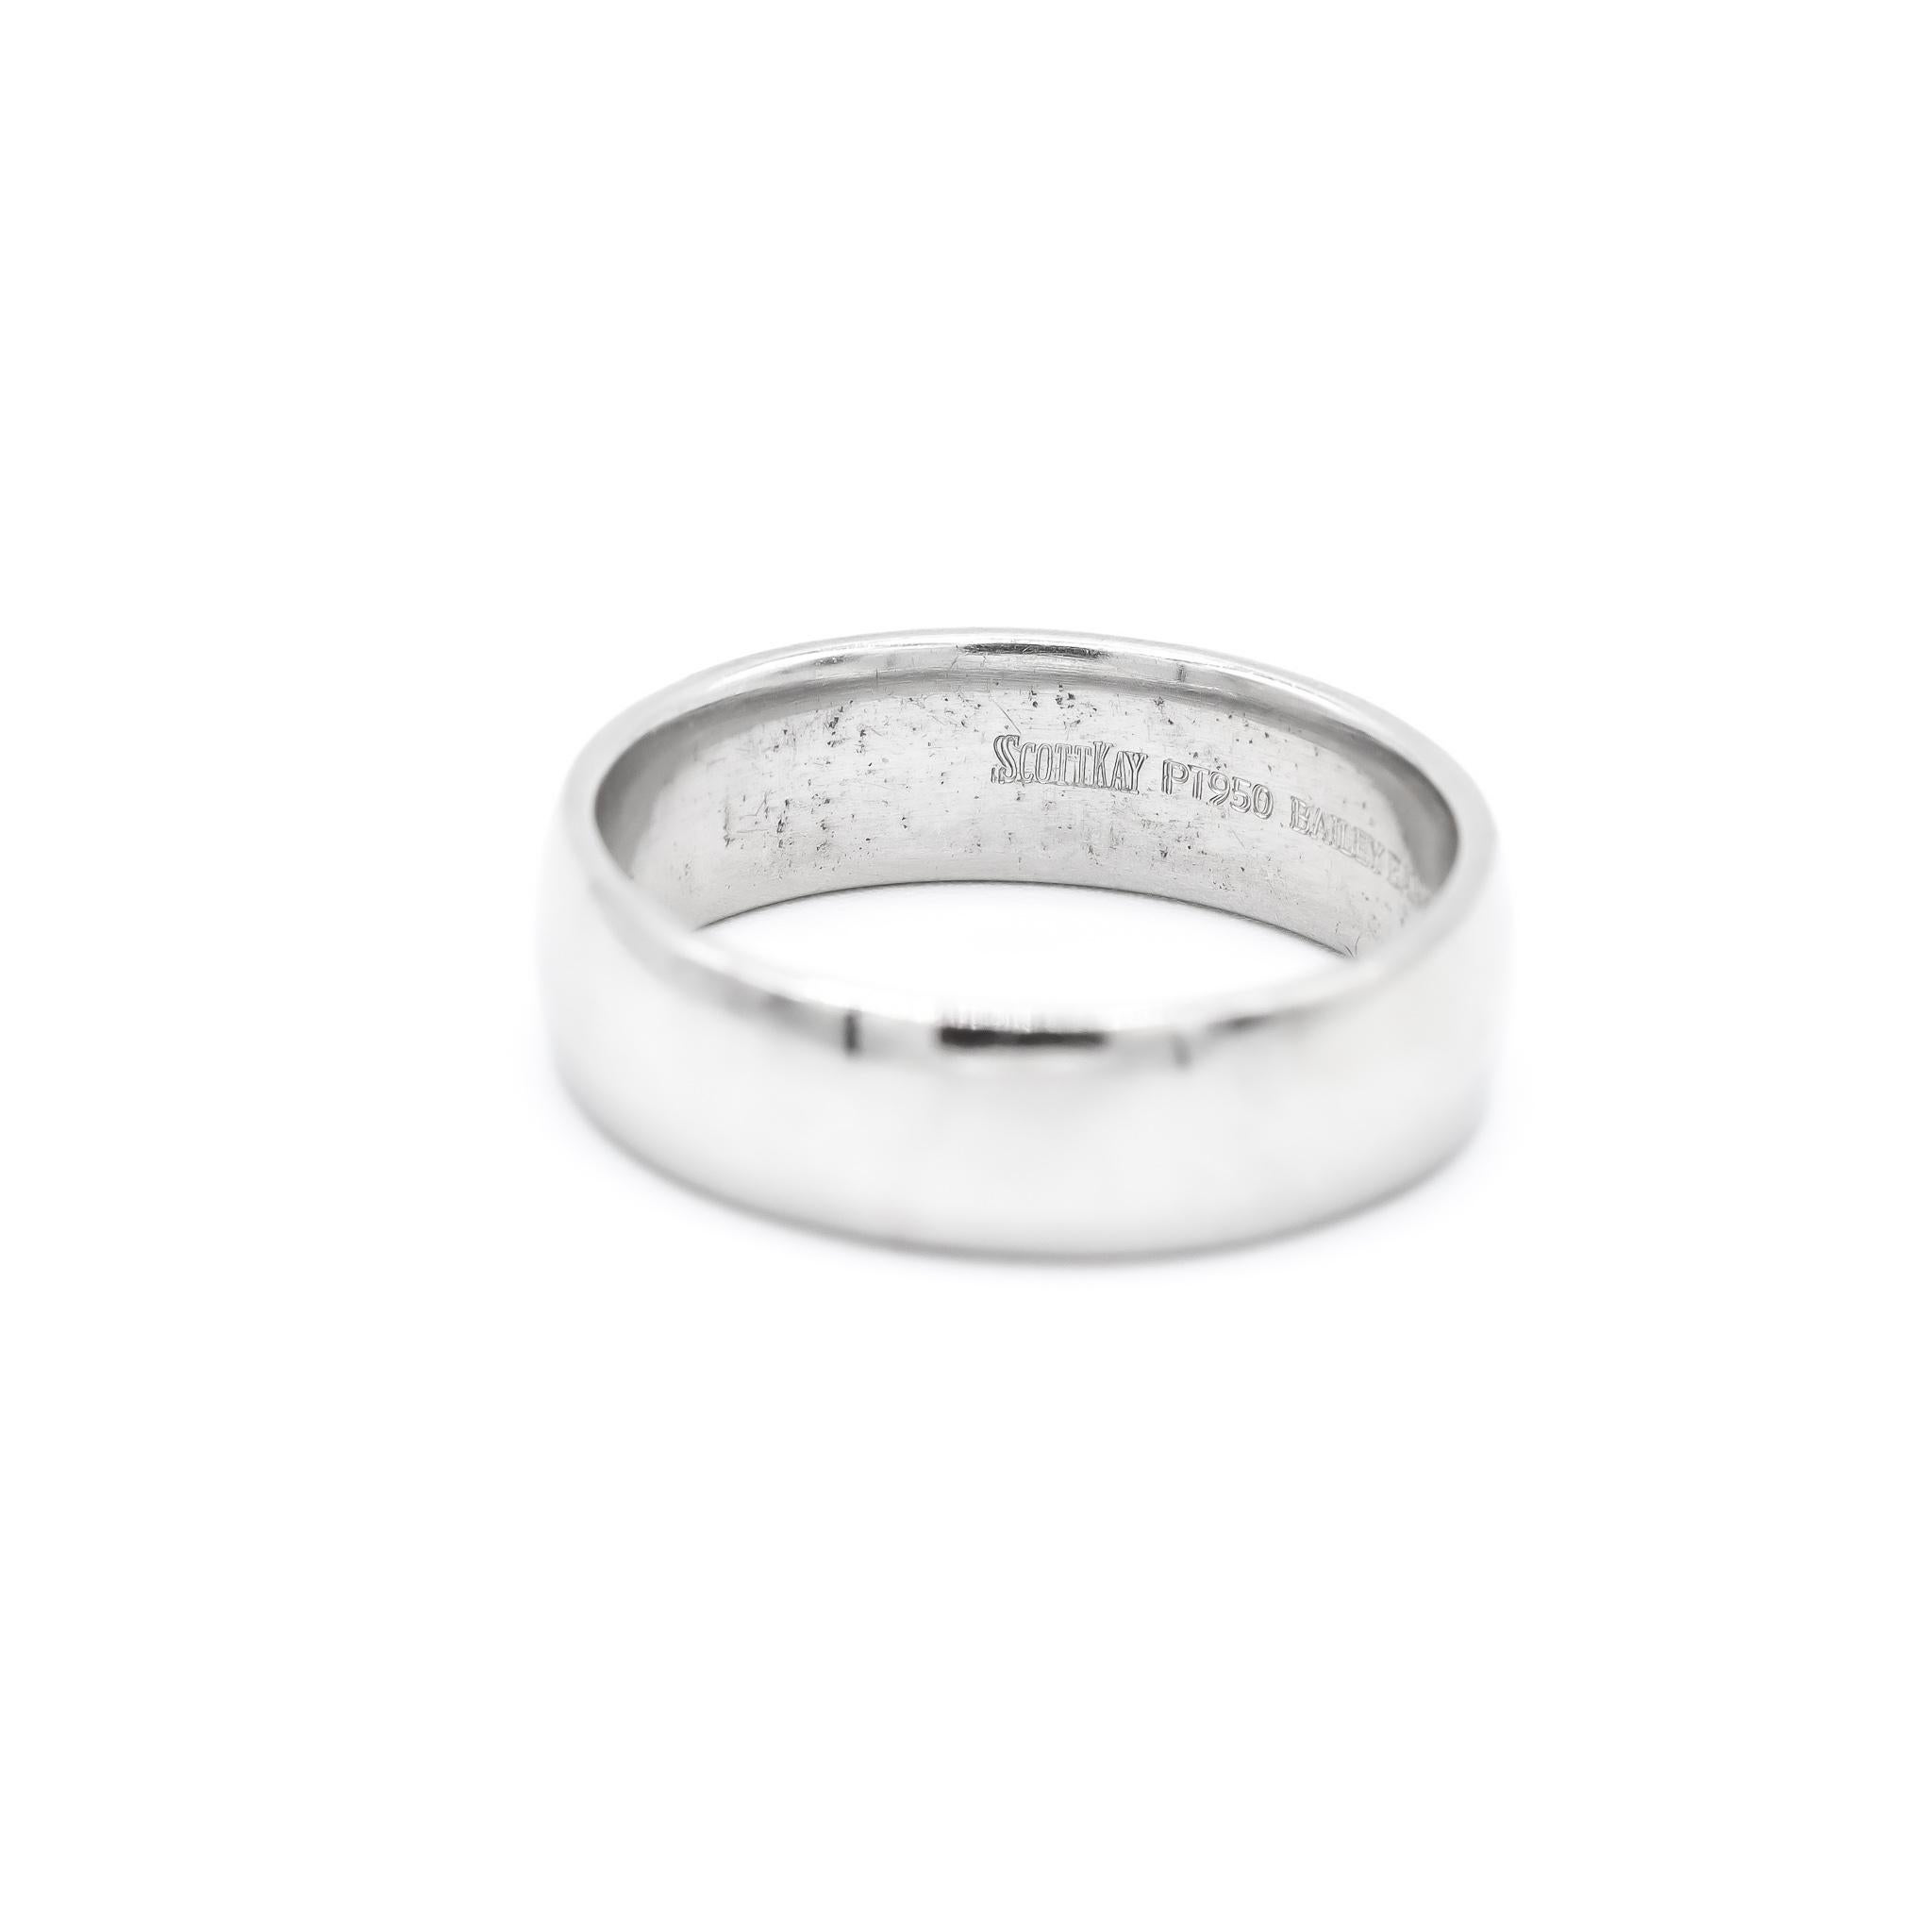 One custom made polished platinum, anniversary, wedding band with a soft-square shank. The band is a size 8. The band weighs a total of 9.90 grams. Engraved with 